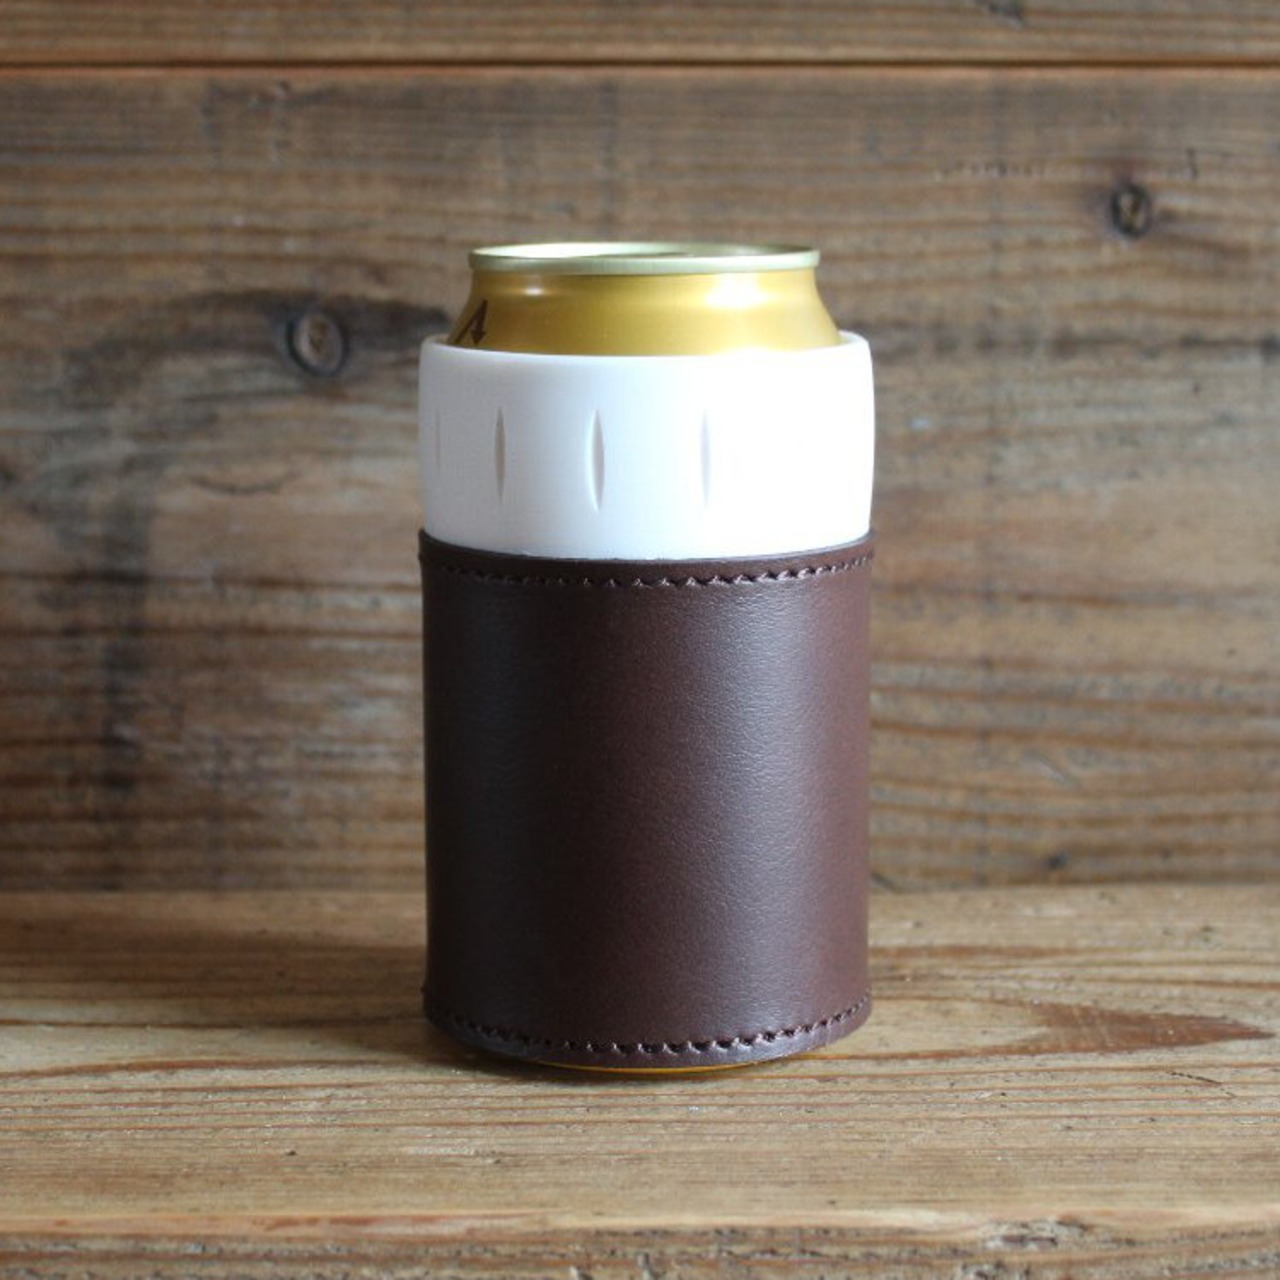 What will be will be サーモス THERMOS 保冷缶 ホルダー レザー カバー 350ml